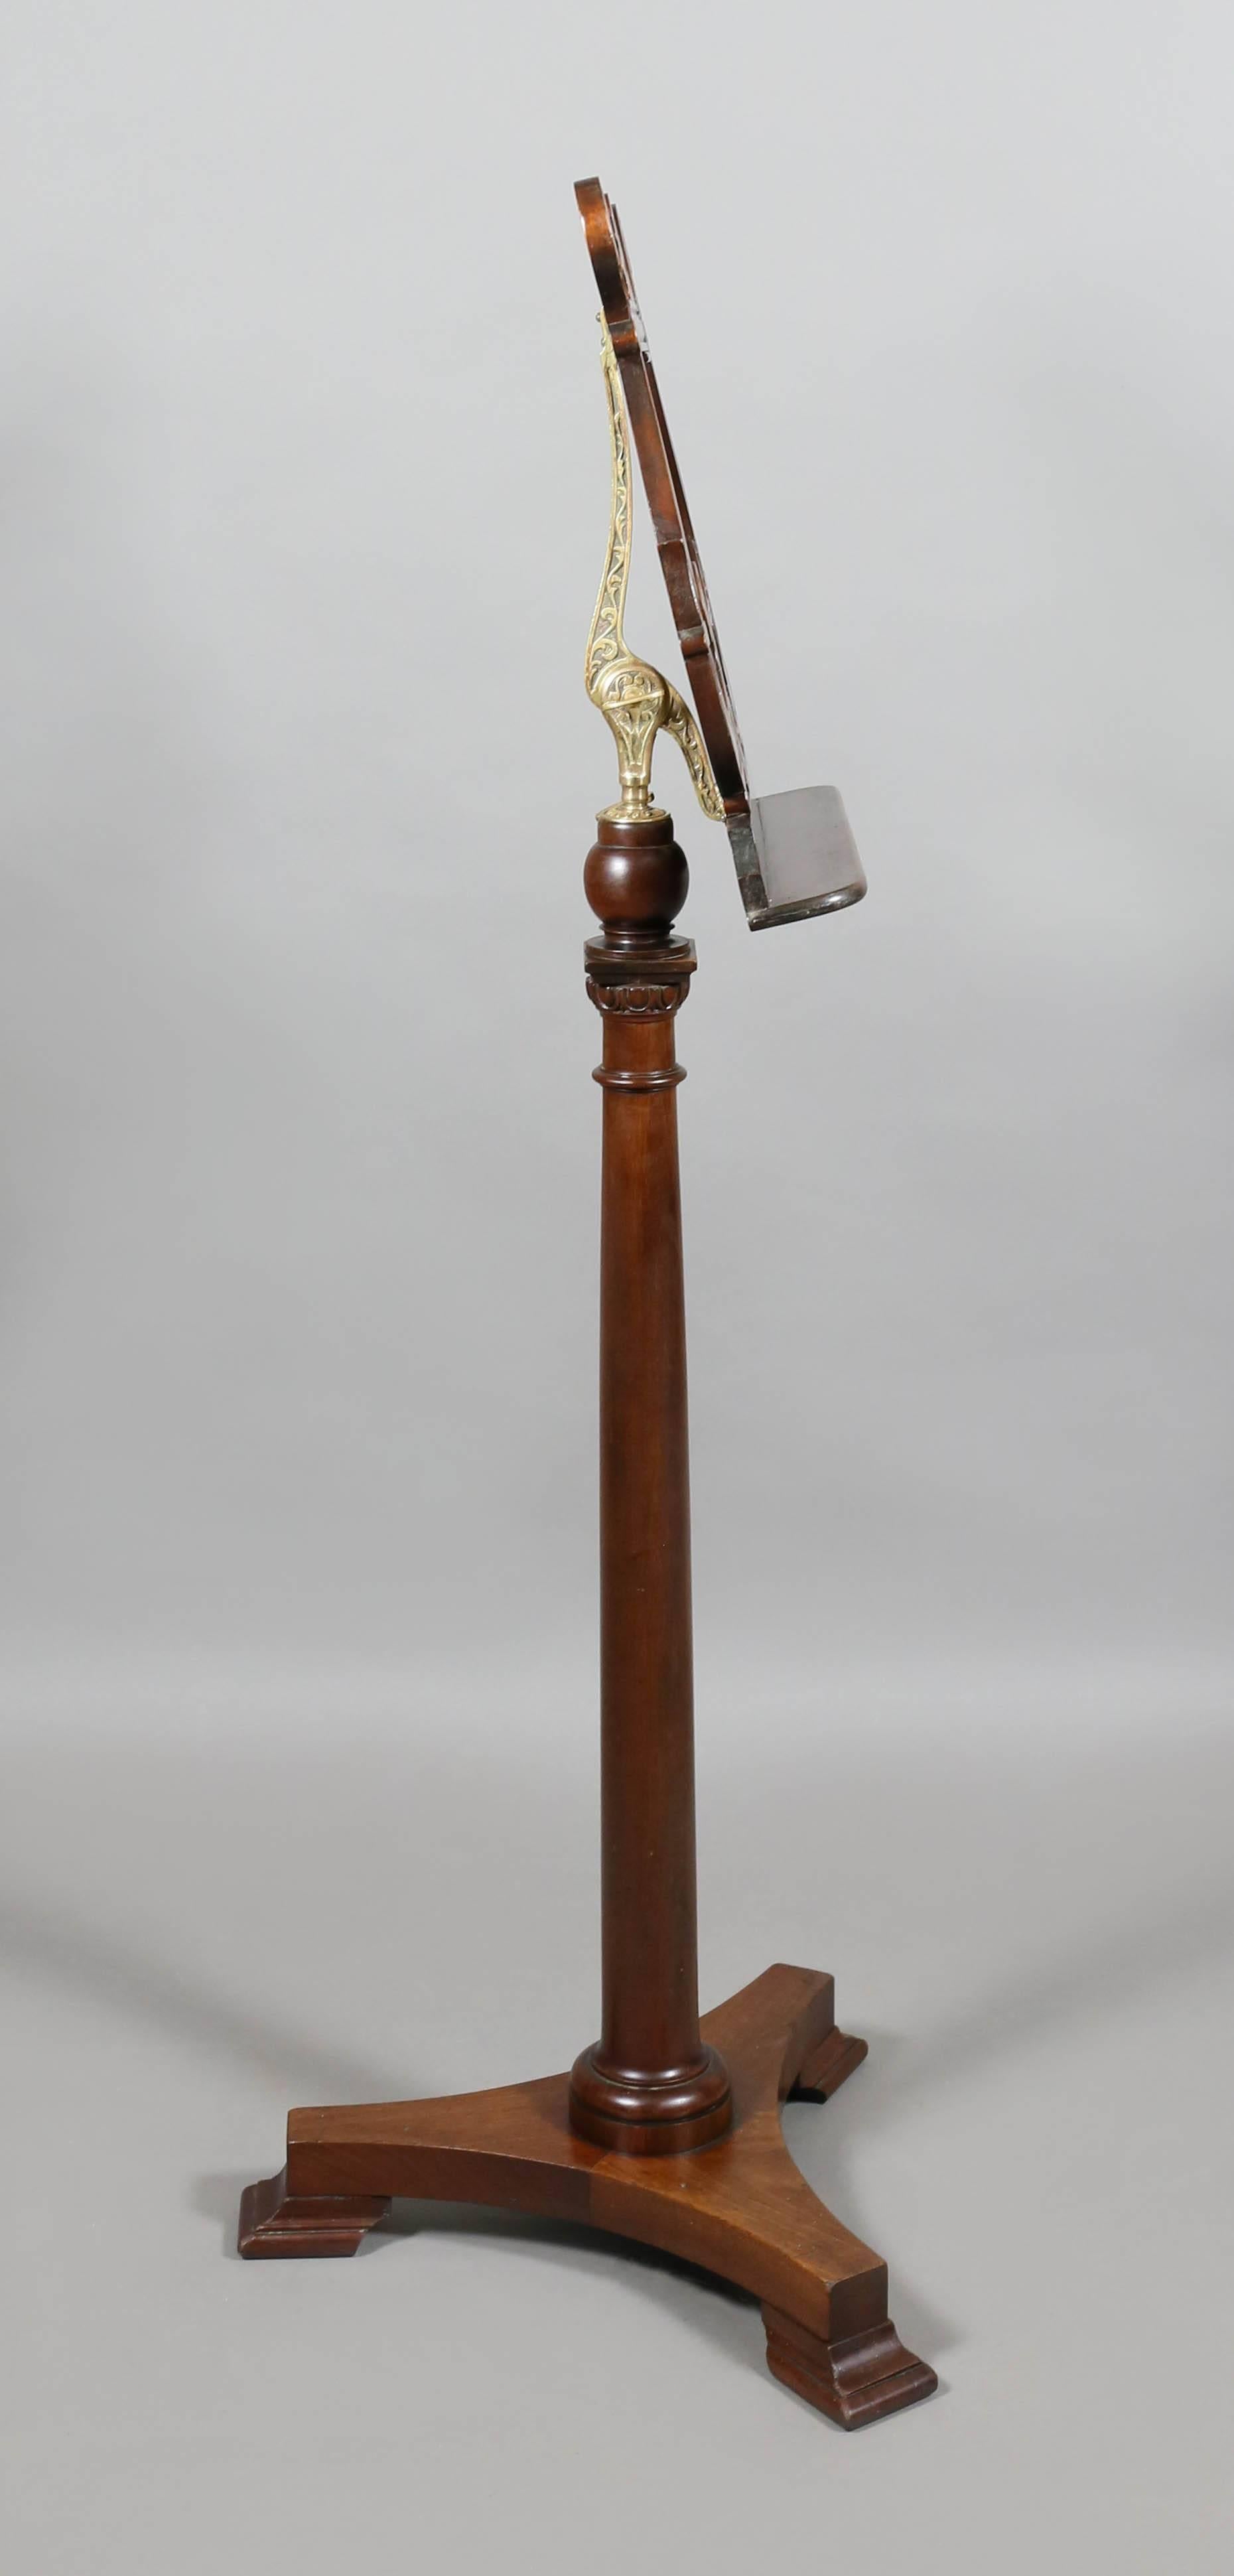 Late 19th Century American Classical Revival Mahogany Music Stand